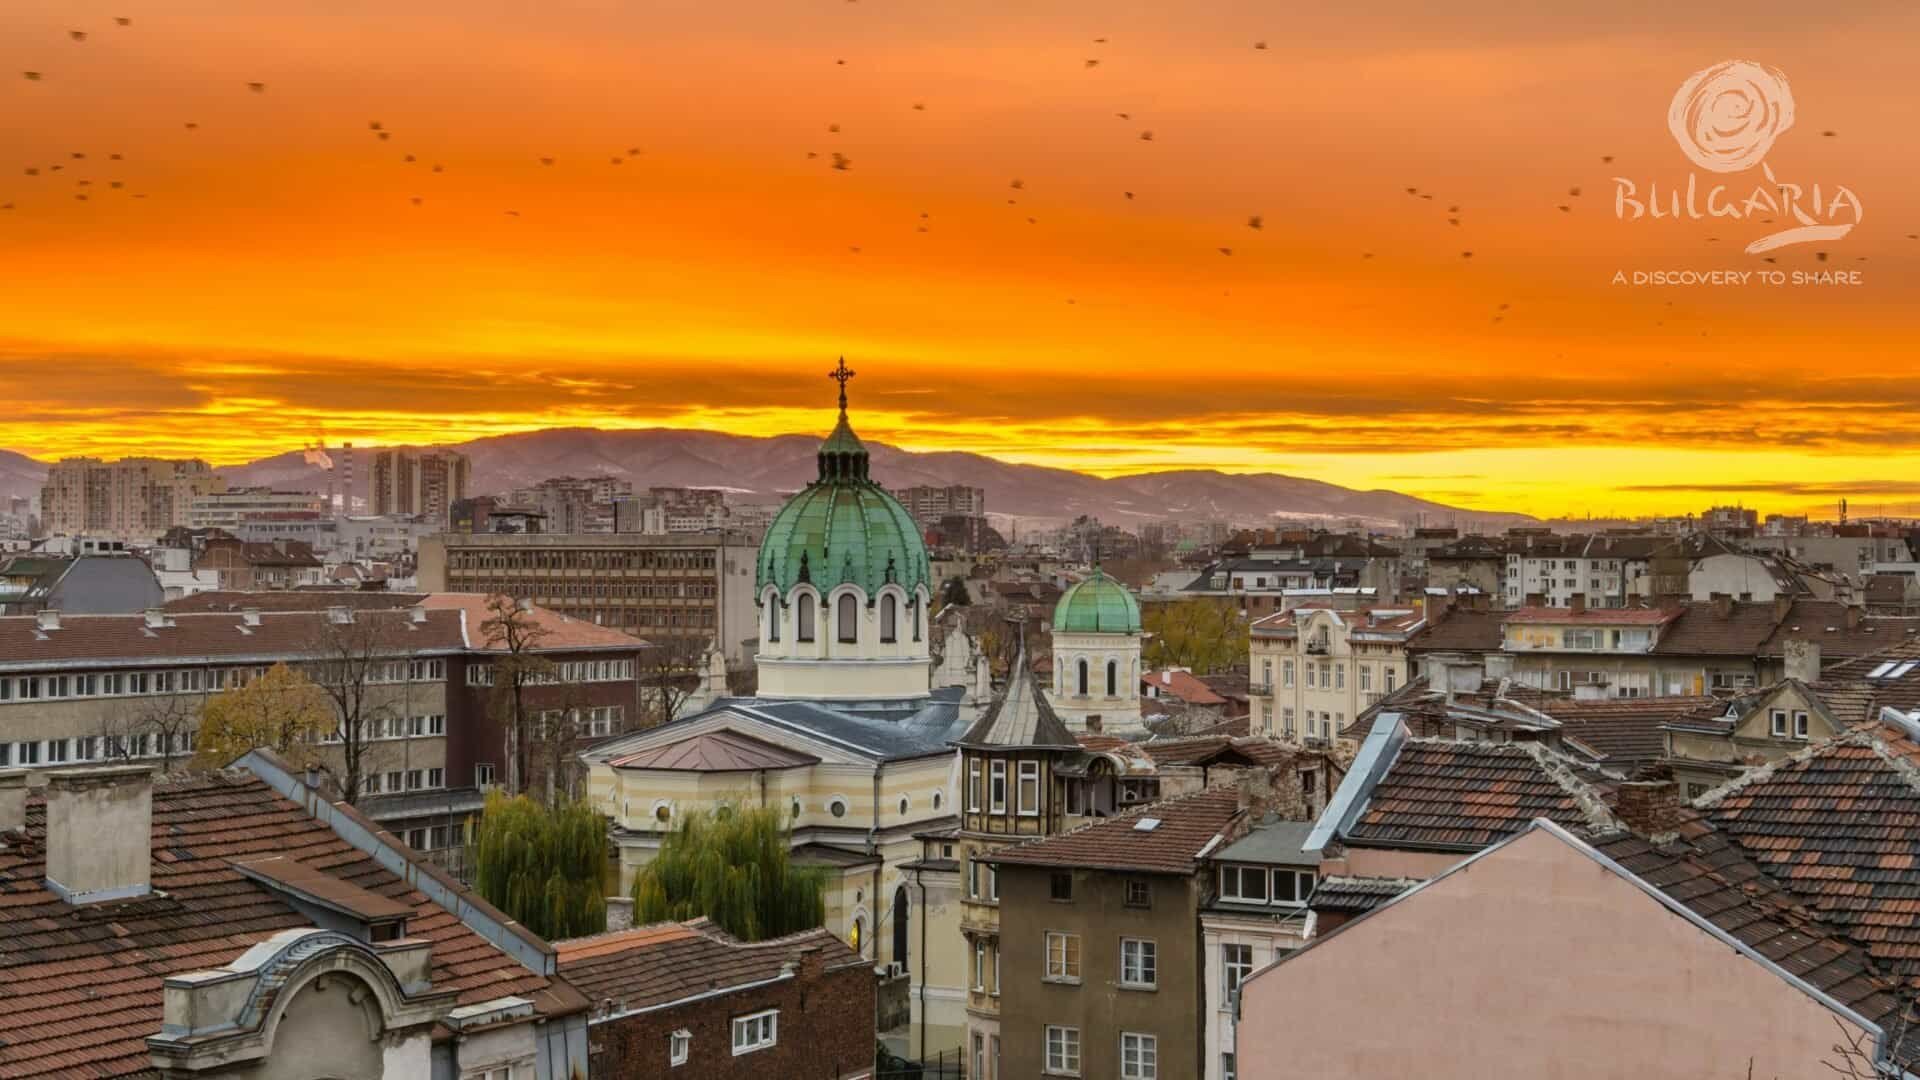 Sunset over the rooftops of Sofia, showcasing the city's beautiful skyline with colorful hues painting the sky.